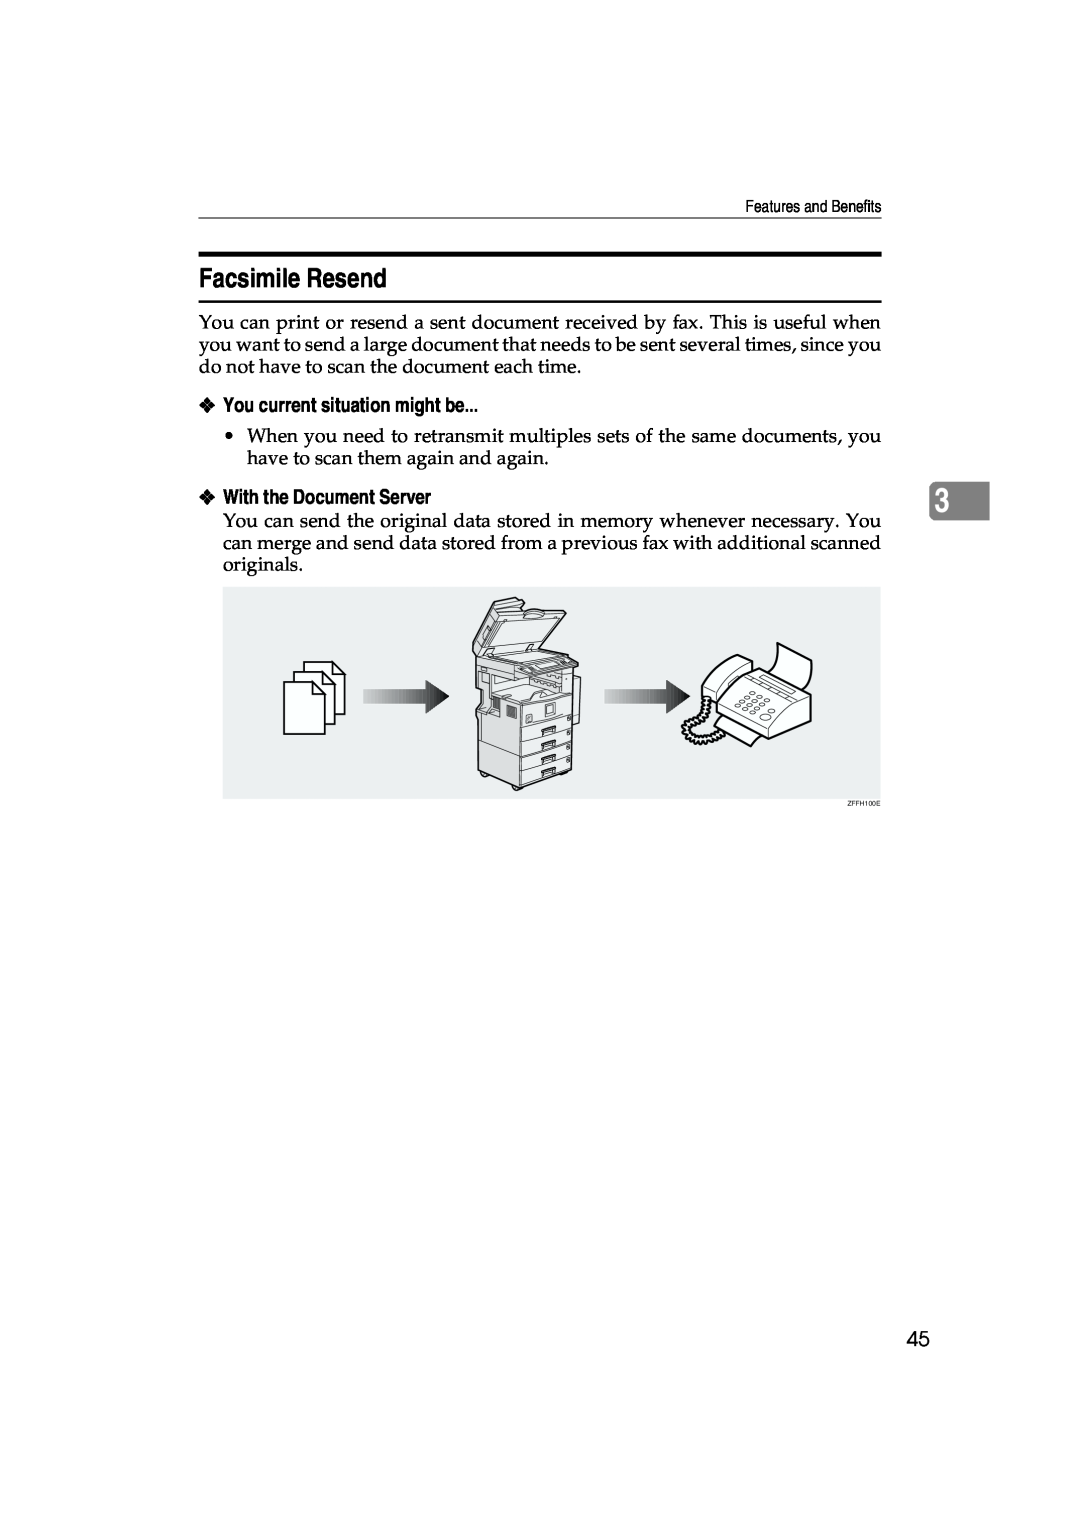 Lanier 5622 AG, 5627 AG manual Facsimile Resend, You current situation might be, With the Document Server, ZFFH100E 